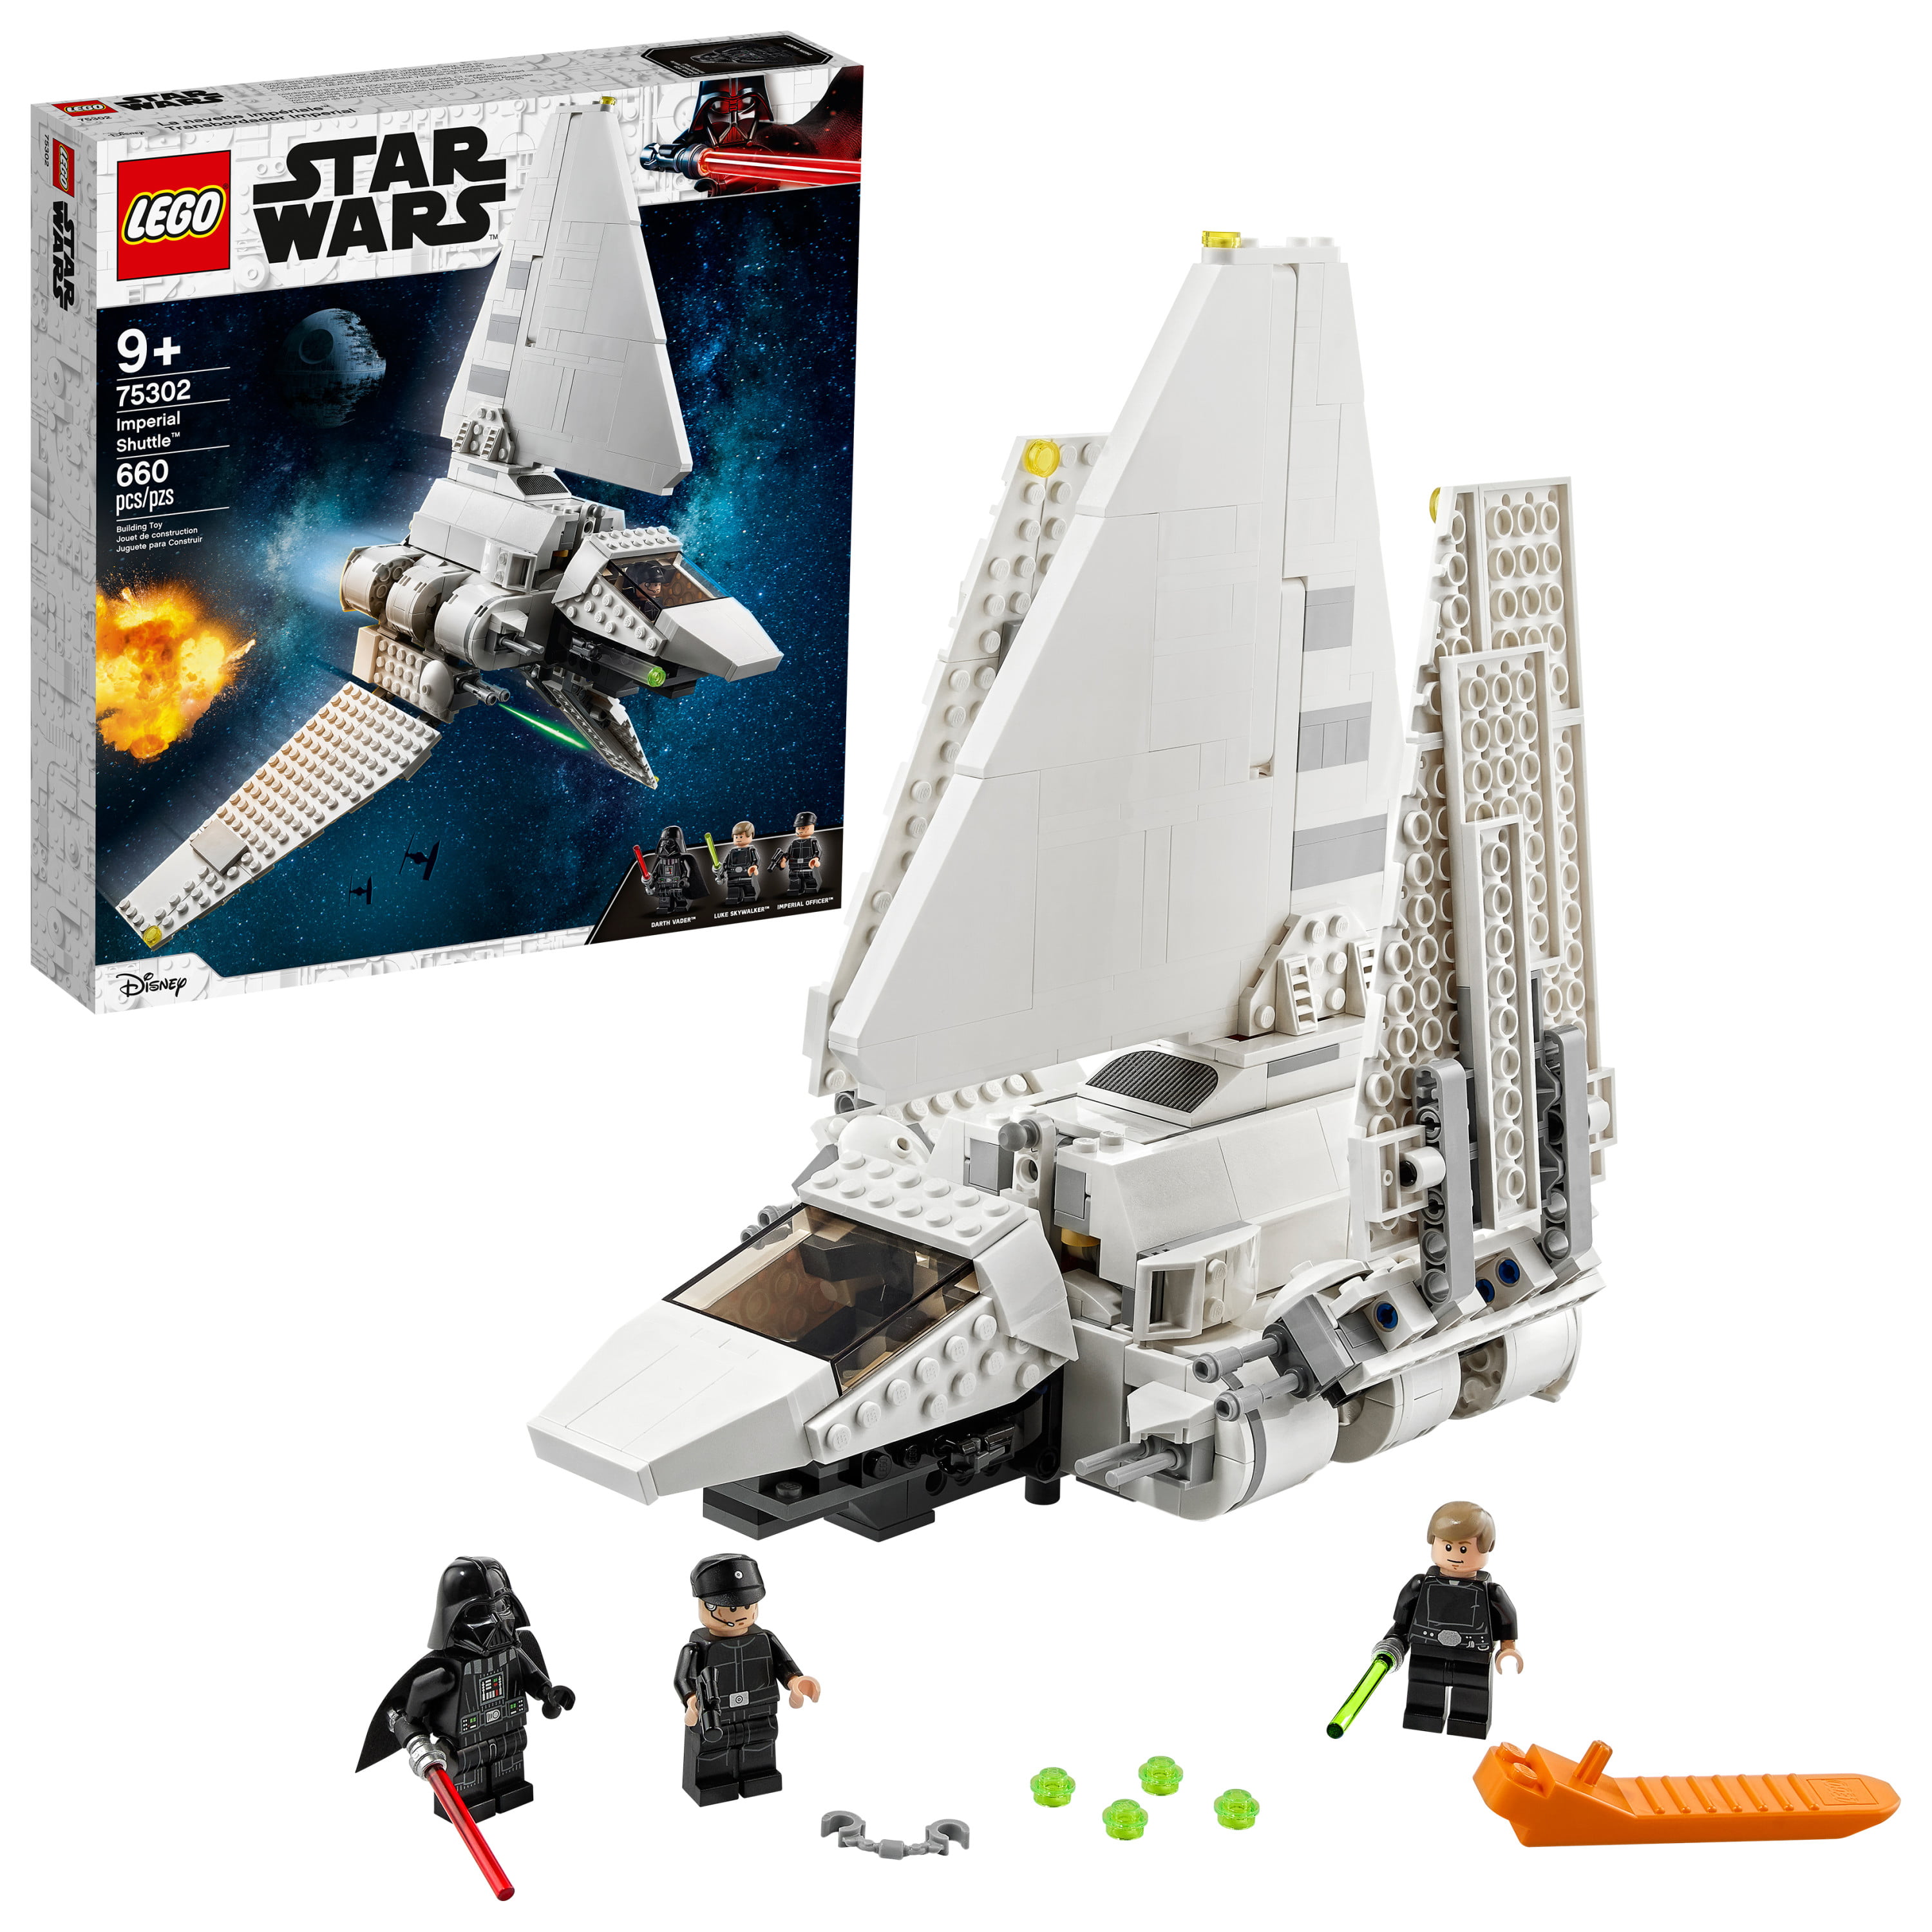 660-Piece LEGO Star Wars Imperial Shuttle Building Kit (75302) $40 + Free Shipping